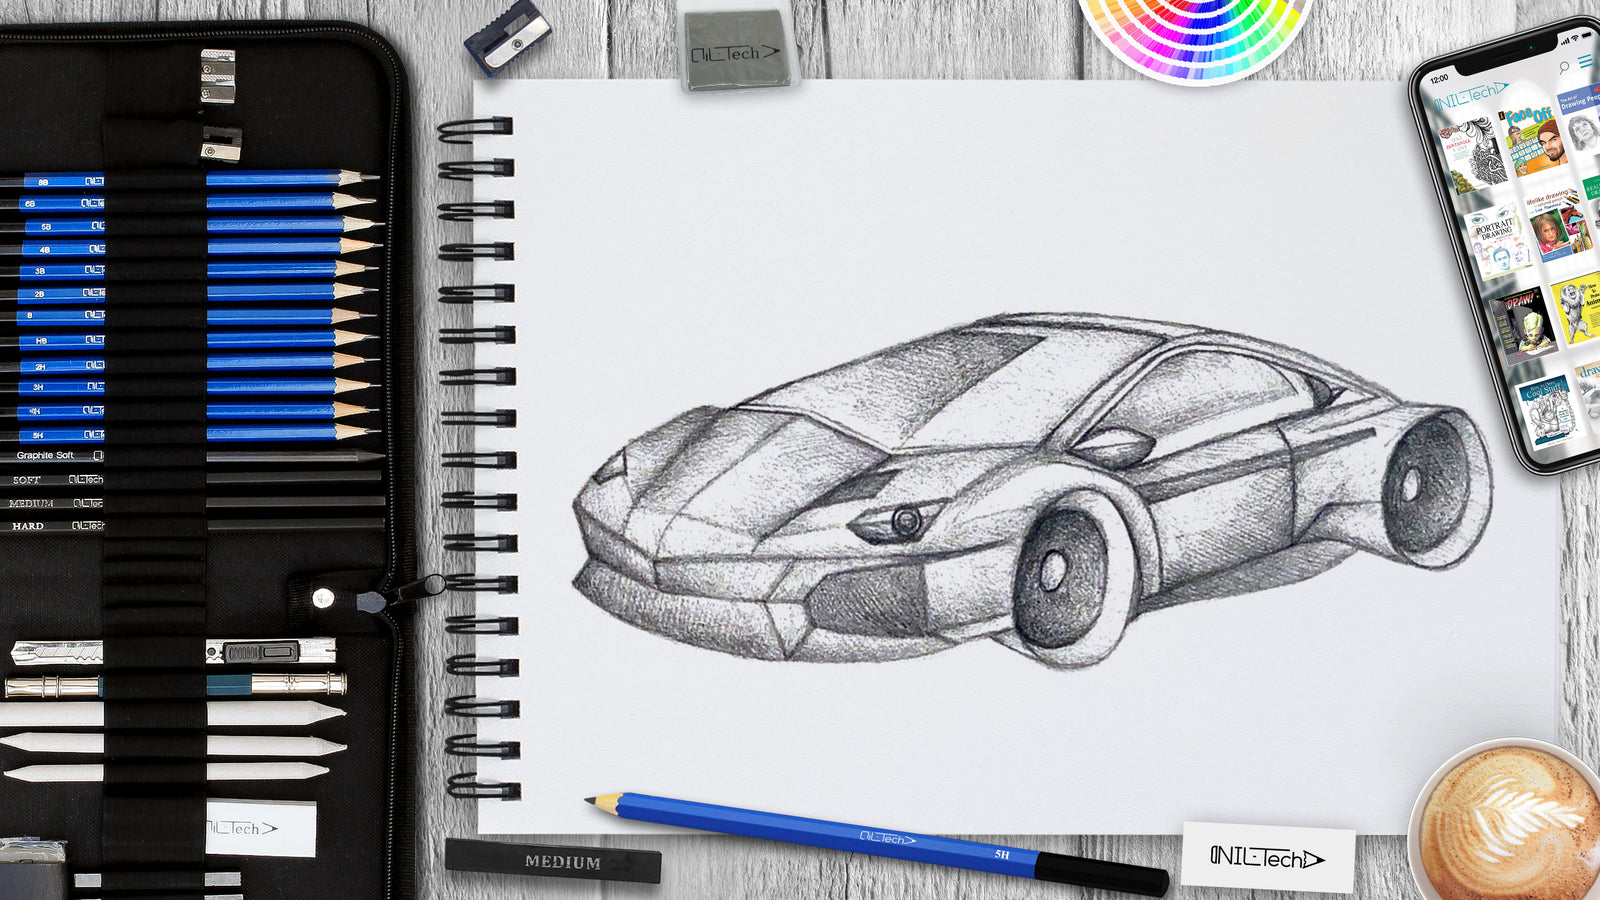 How To Draw A Car? - Step by Step Drawing Guide for Kids